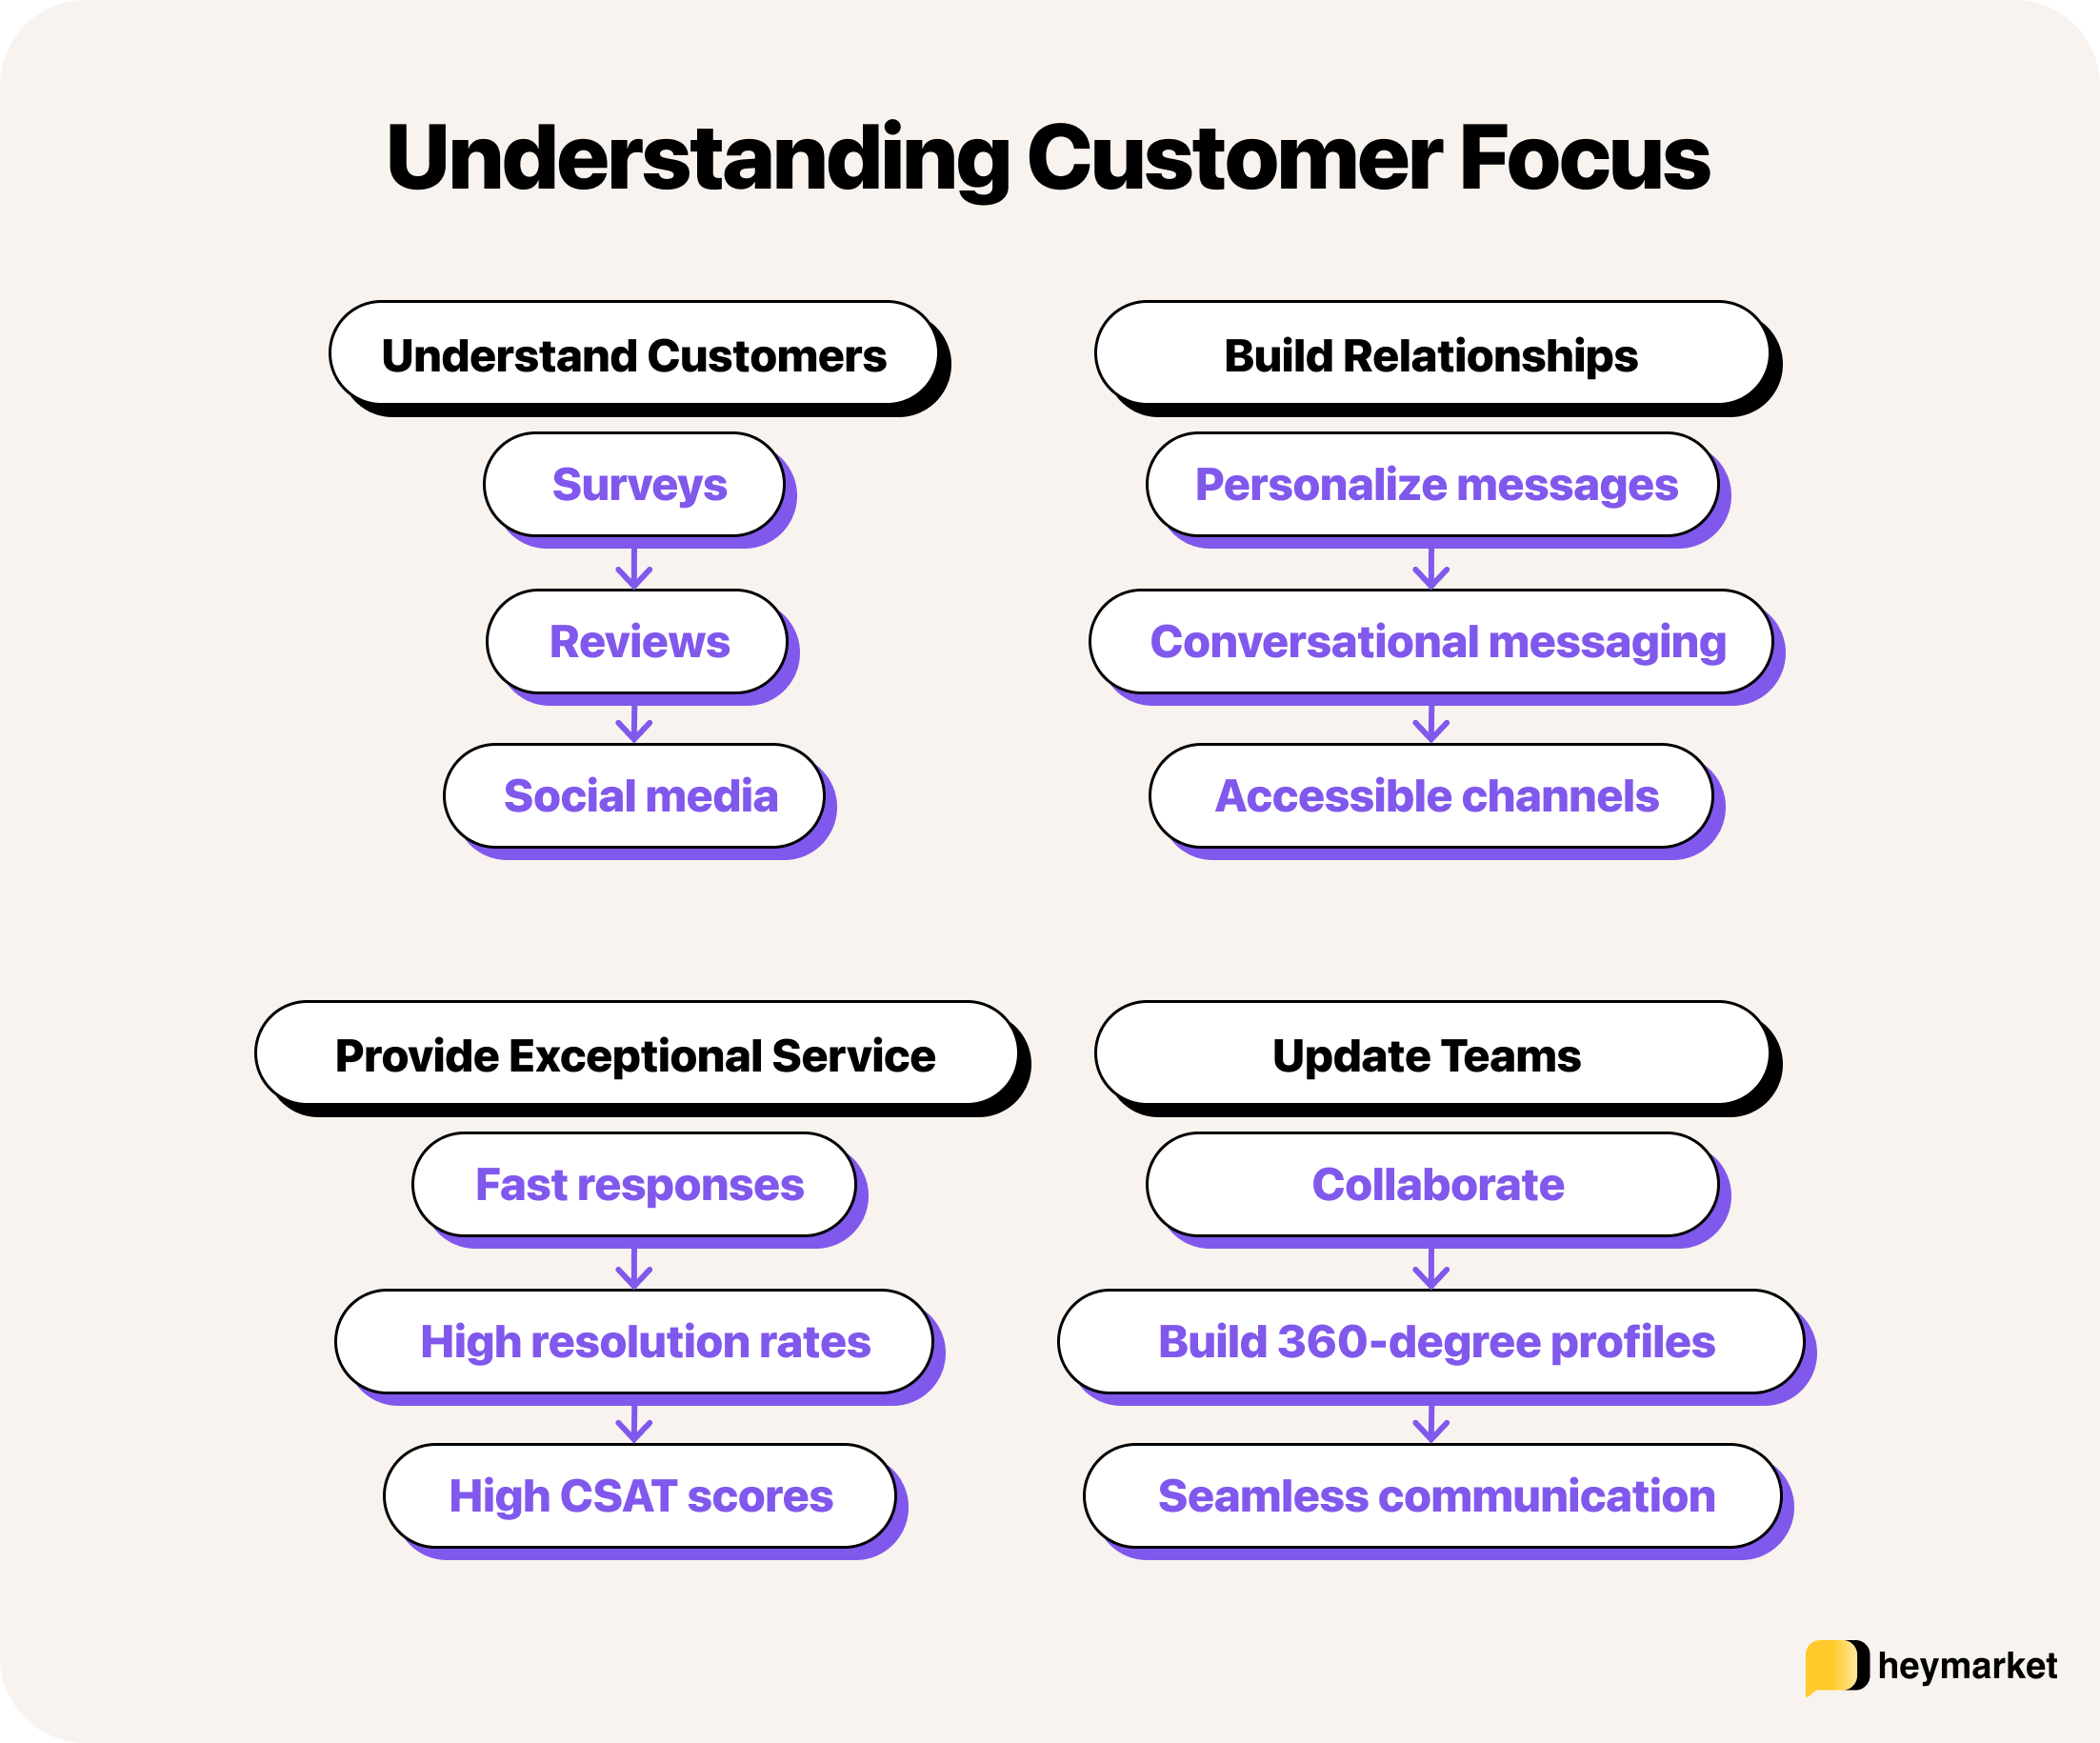 Flow chart of tips for understanding customers, building relationships, providing exceptional service, and updating teams